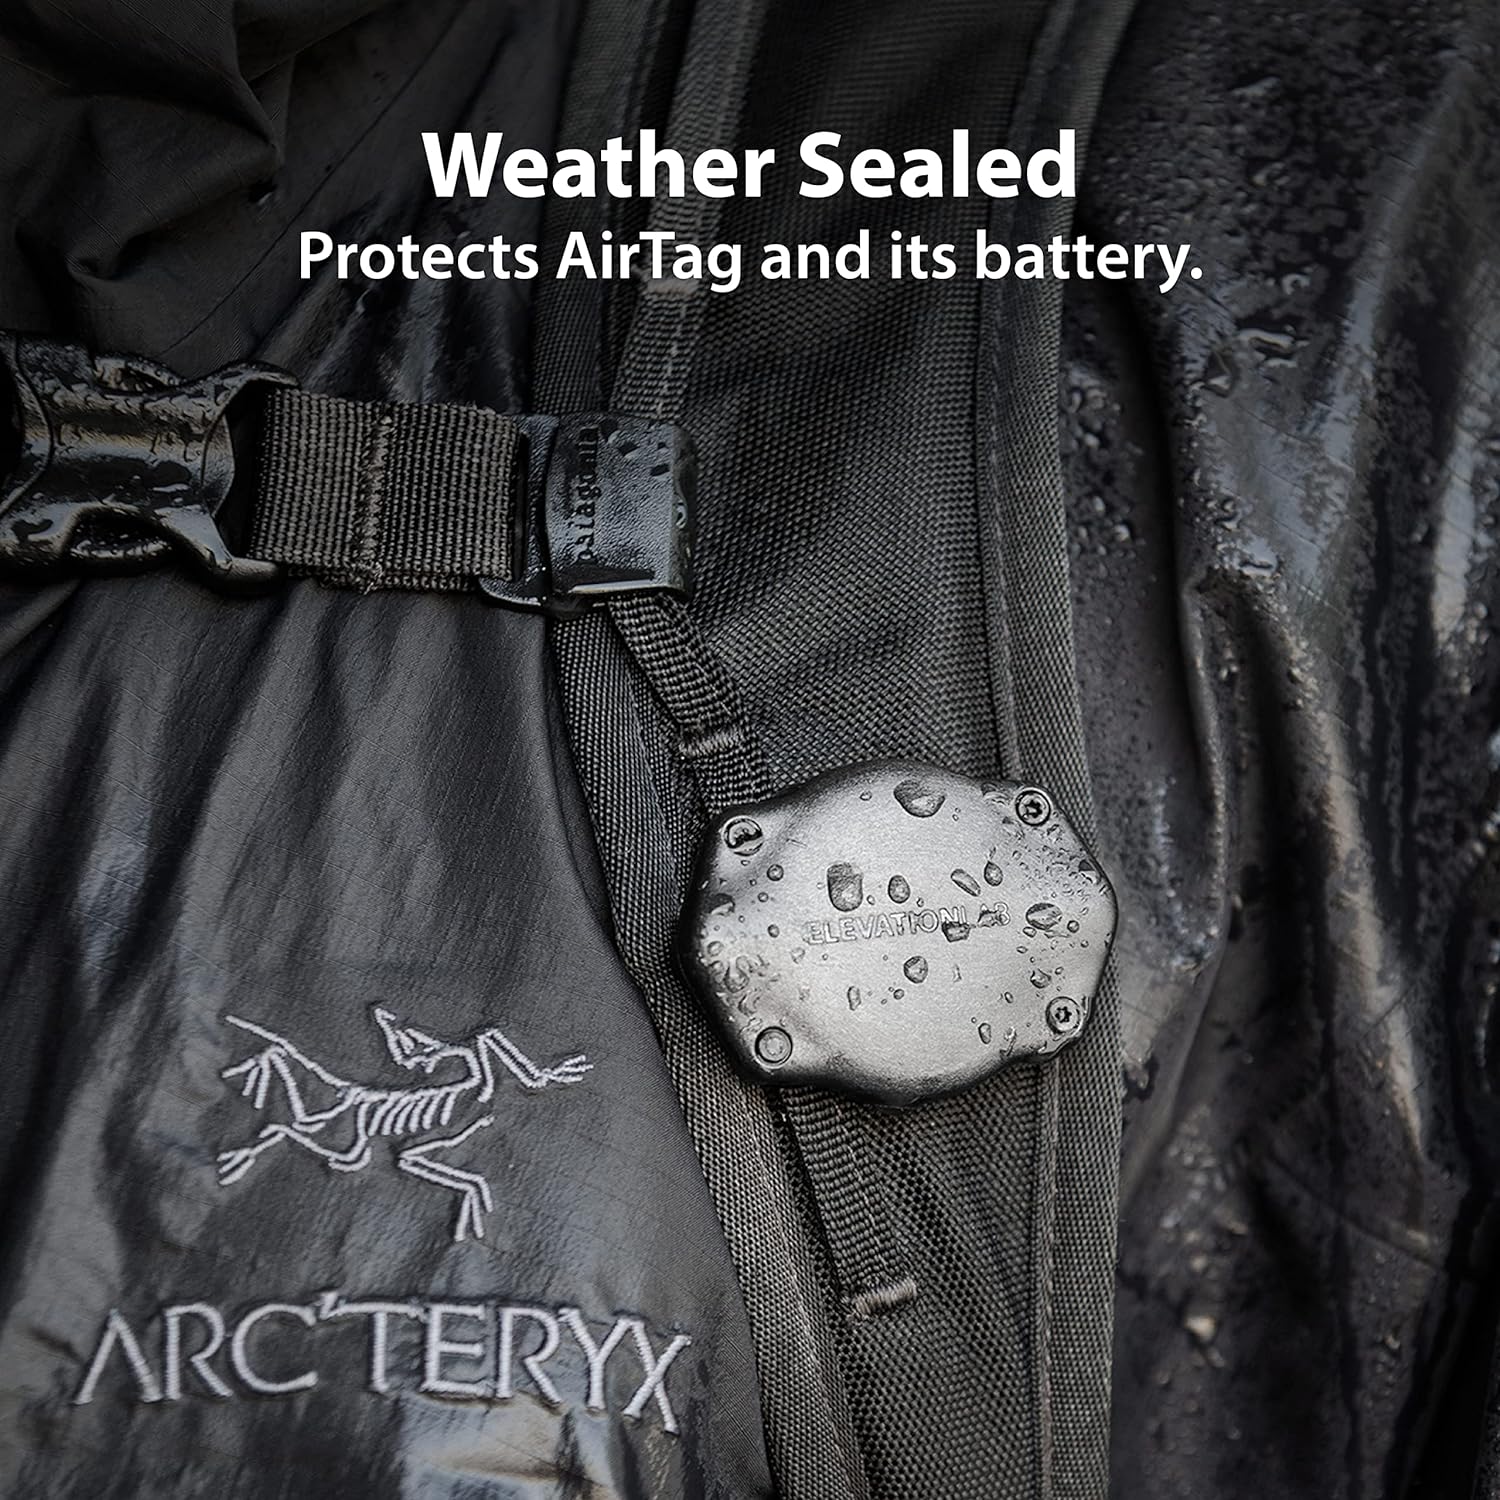 TagVault - The Ultimate AirTag Strap Mount: A Waterproof and Discreet Solution for Security